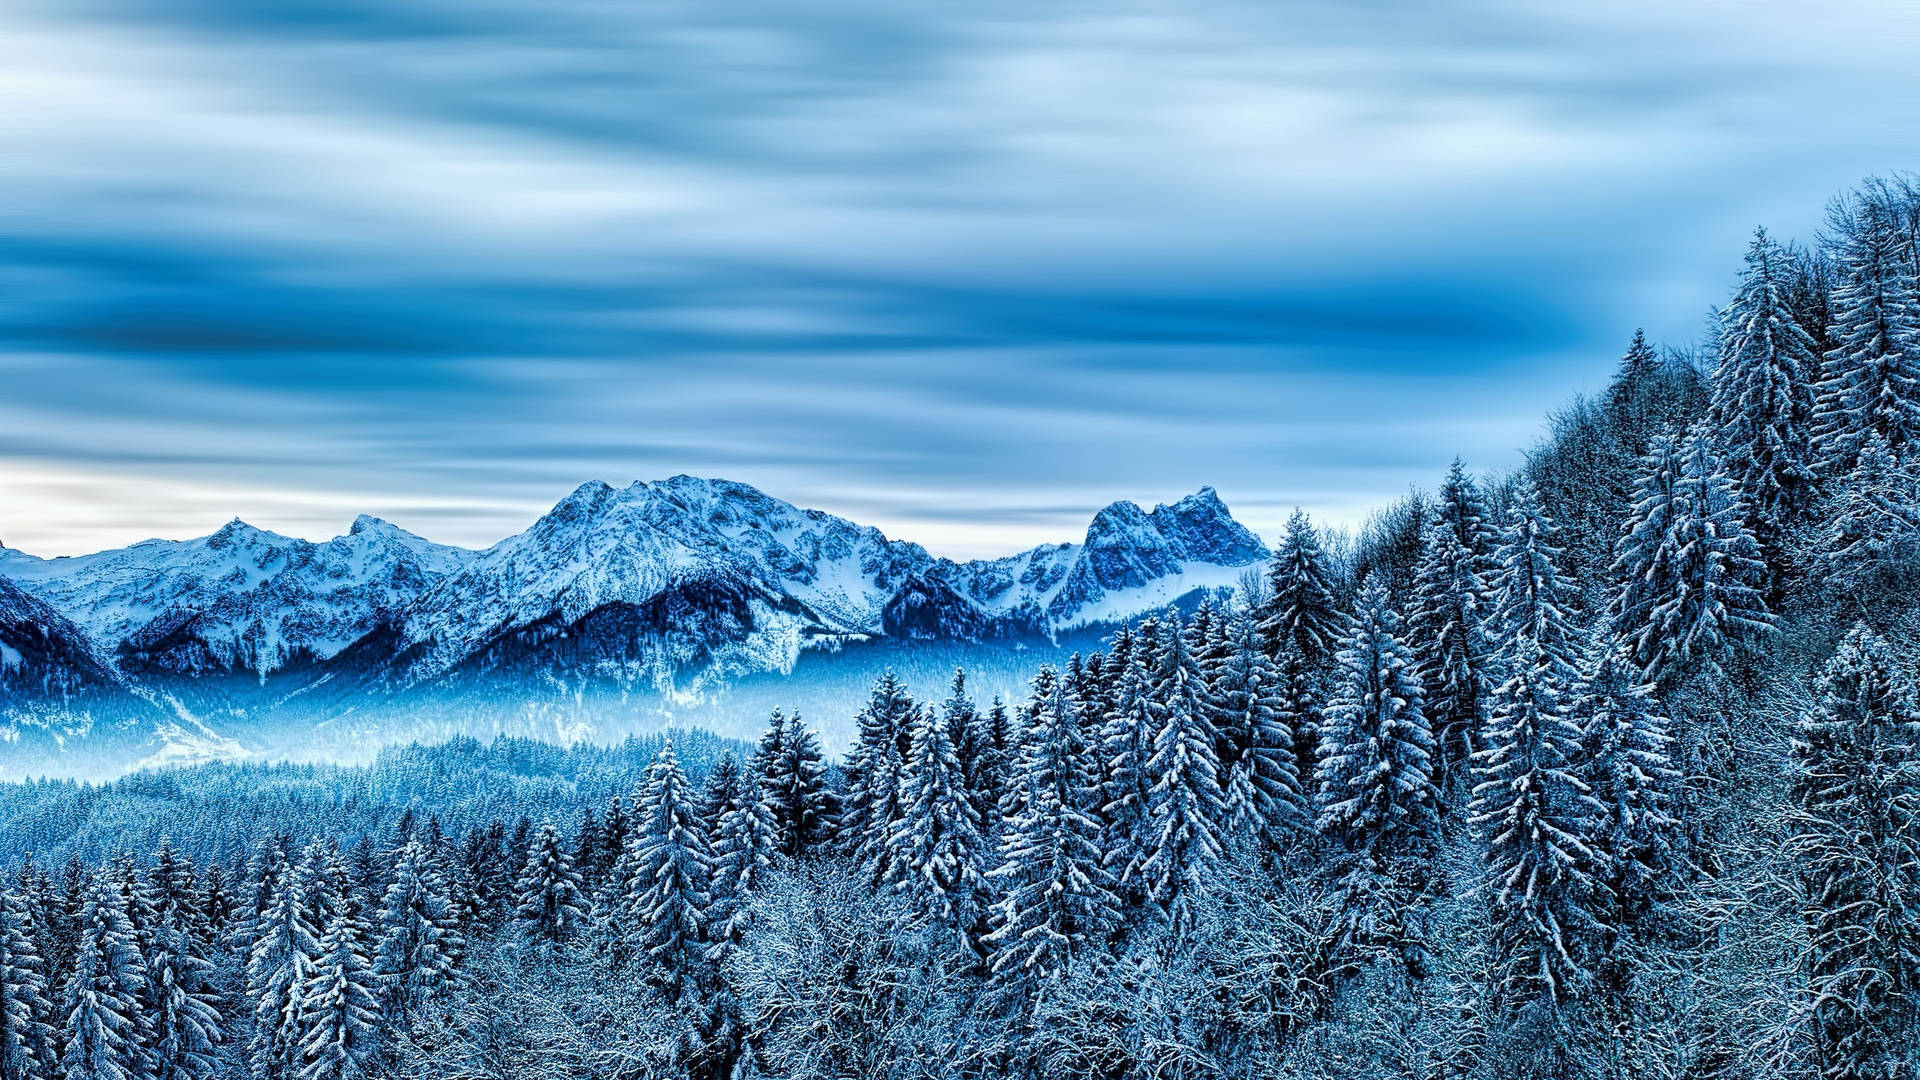 A Snowy Mountain Range With Trees And A Blue Sky Wallpaper